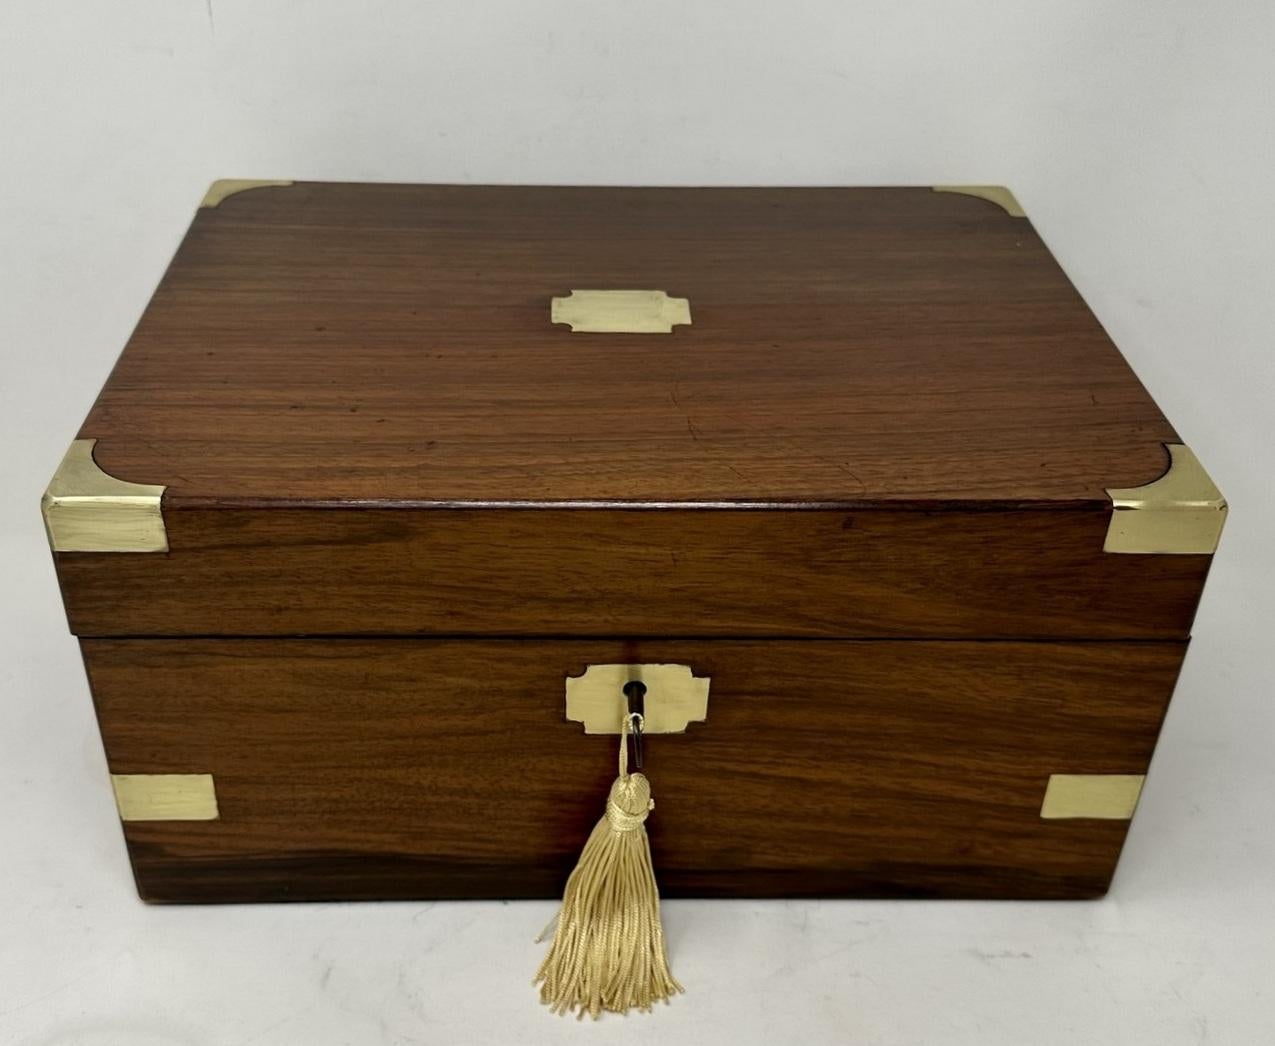 An exceptionally fine early English Well Figured Solid grained Mahogany Ladies or Gents Travelling Writing Slope of outstanding quality and compact proportions. Last quarter of the 19th century. 

The hinged lid opening to reveal a stunning